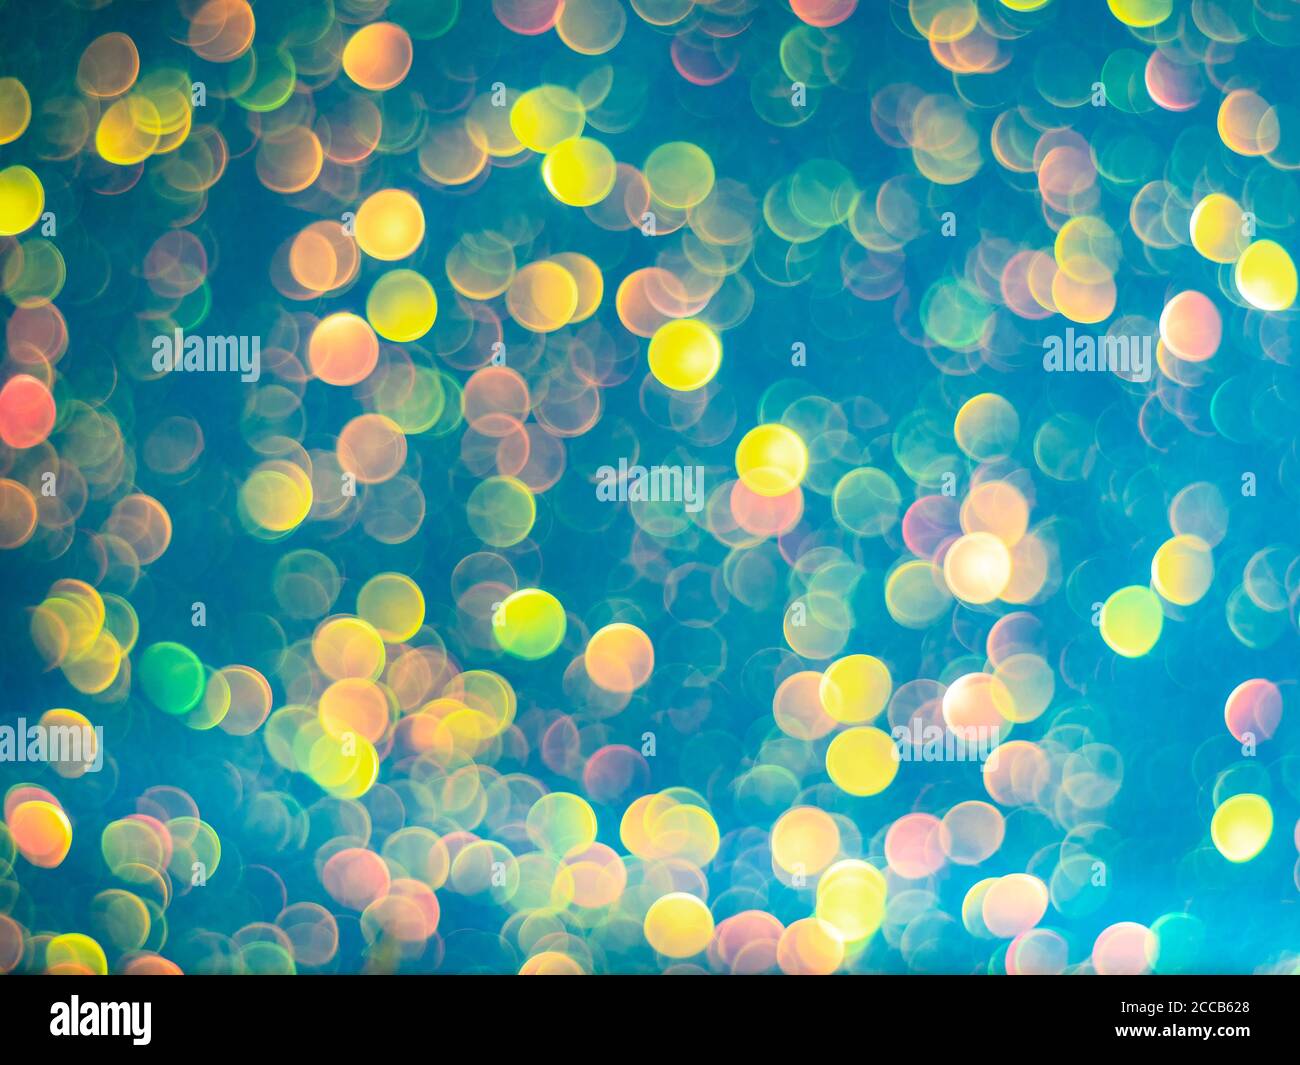 Blue bokeh holiday textured glitter background. Blurred abstract holiday background. Sparkling Glitter bokeh. Stock Photo